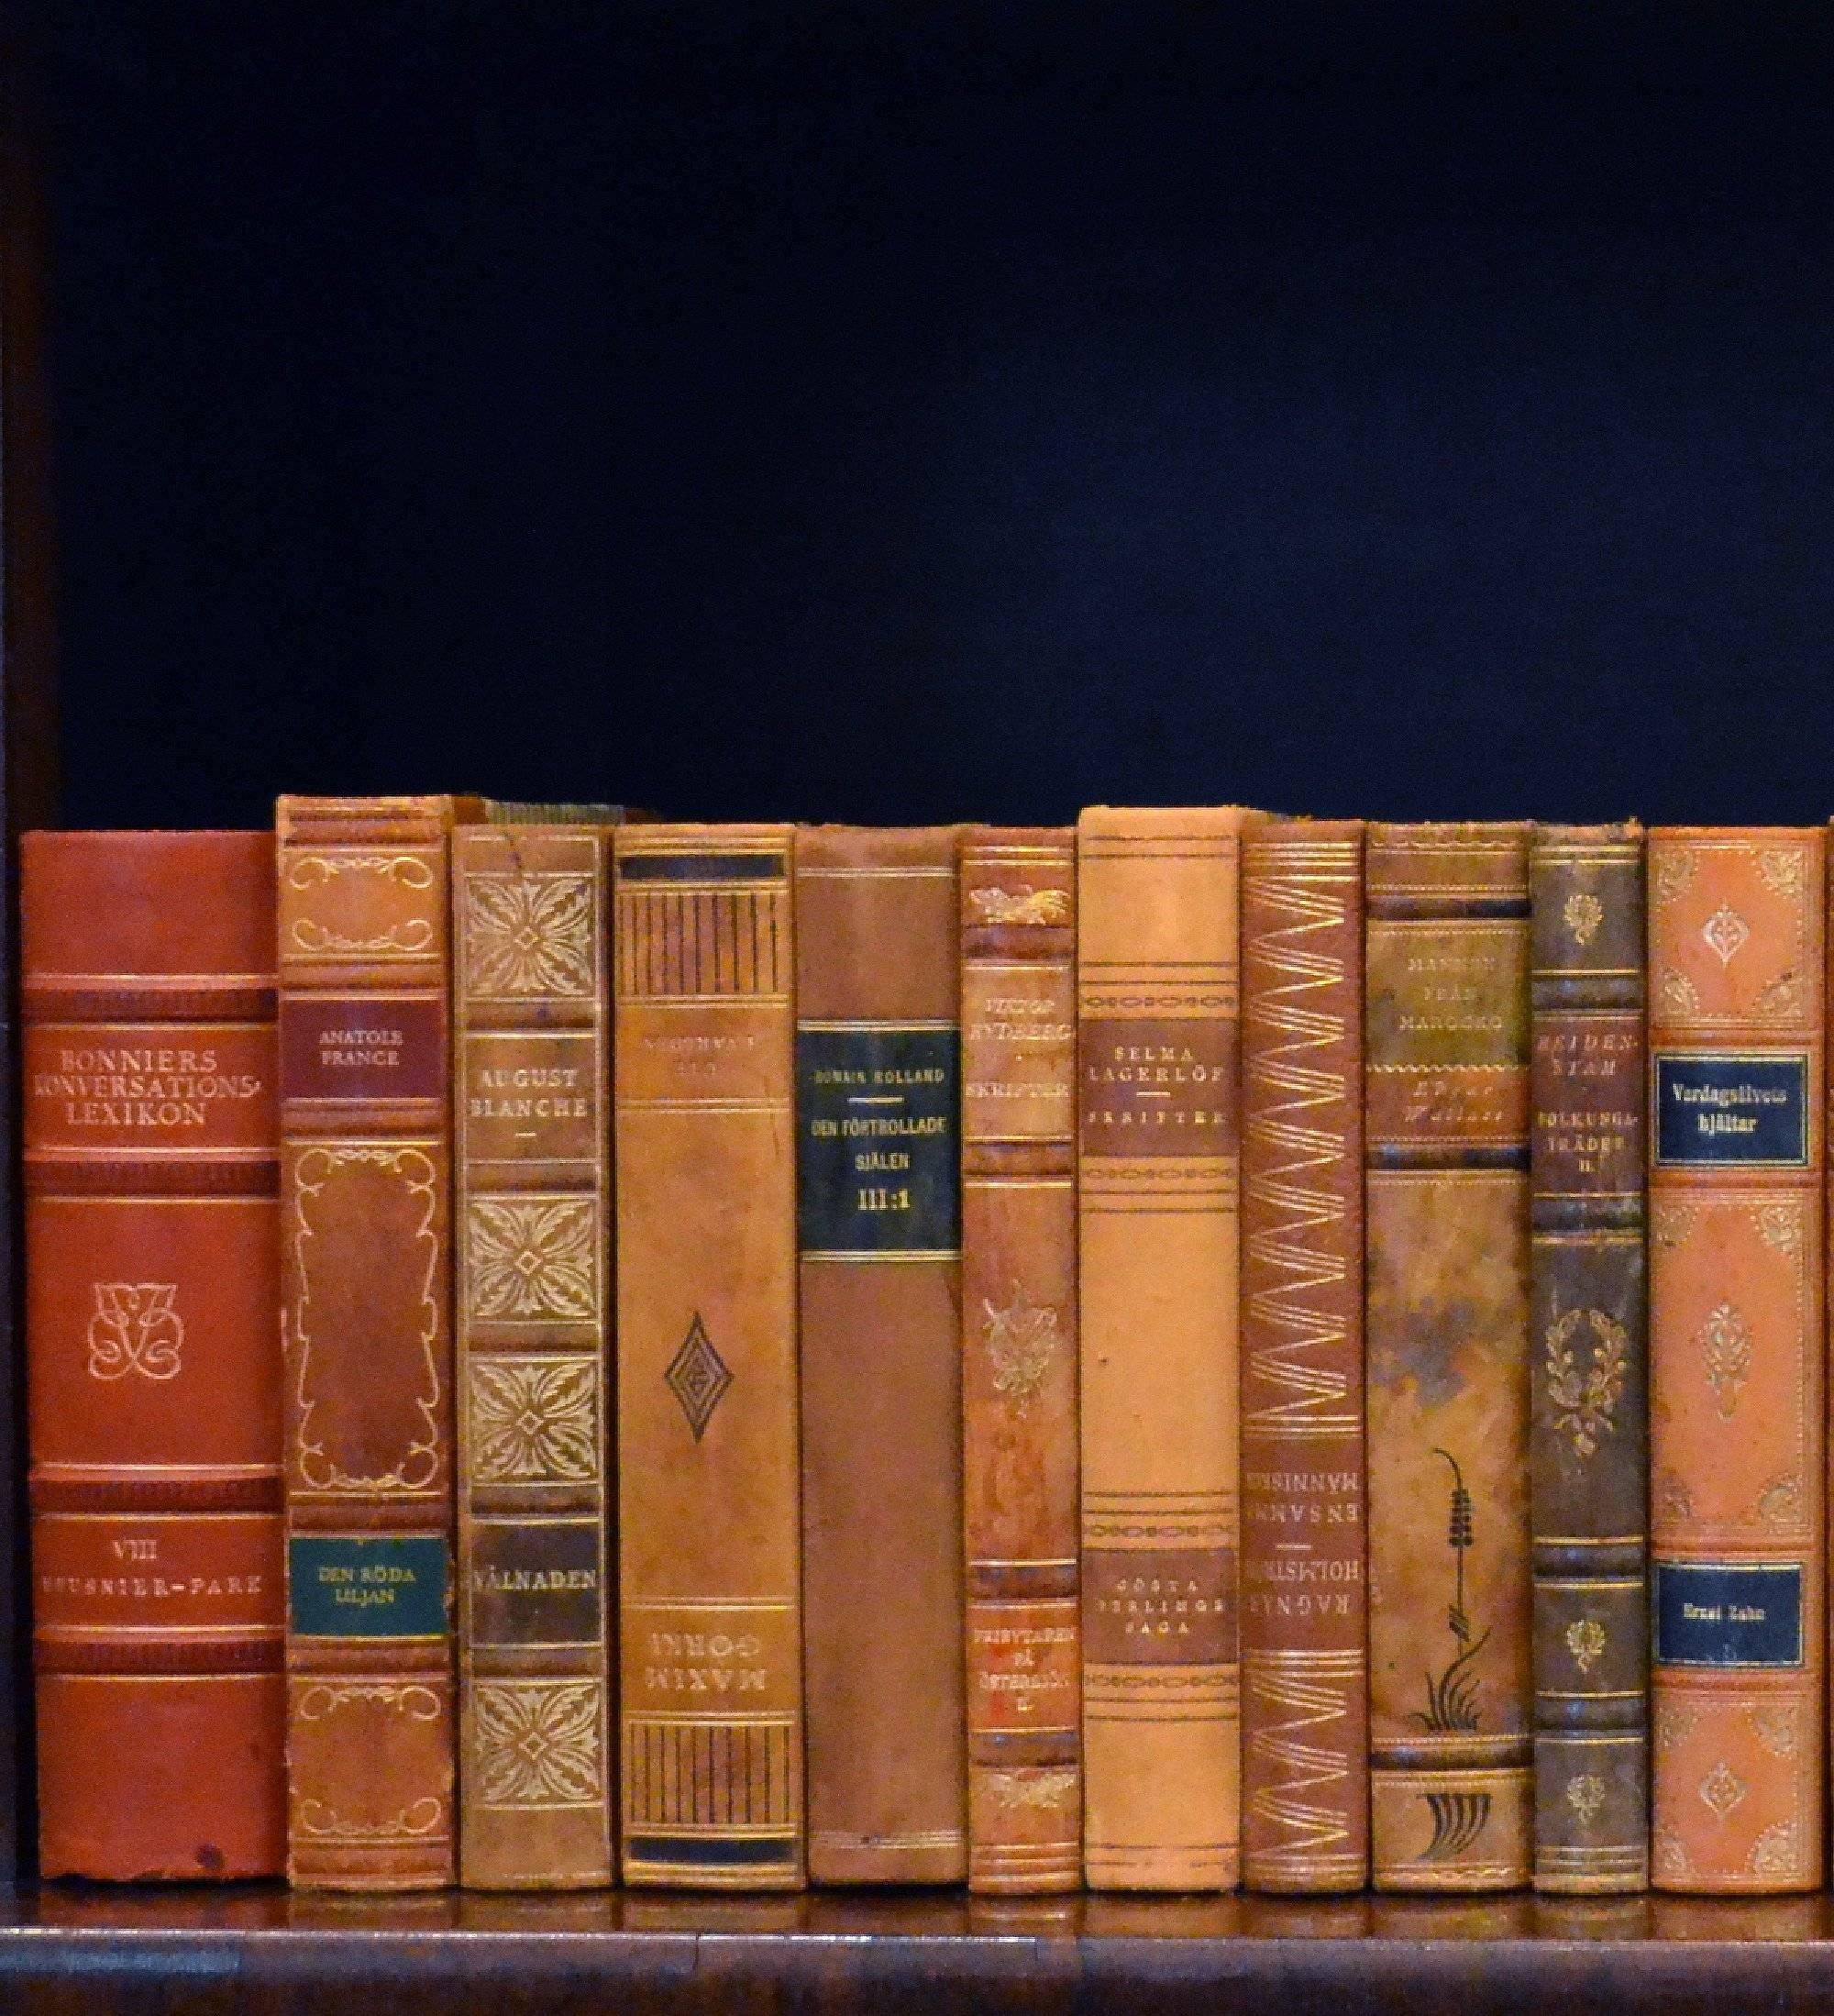 This meter of leather-bound Swedish Literature books contains 31 books, in warm rich tones of dark tan and dark gold with gold leaf embossing. Aside from a few books that are scuffed and scratched, these books are all in very good condition and